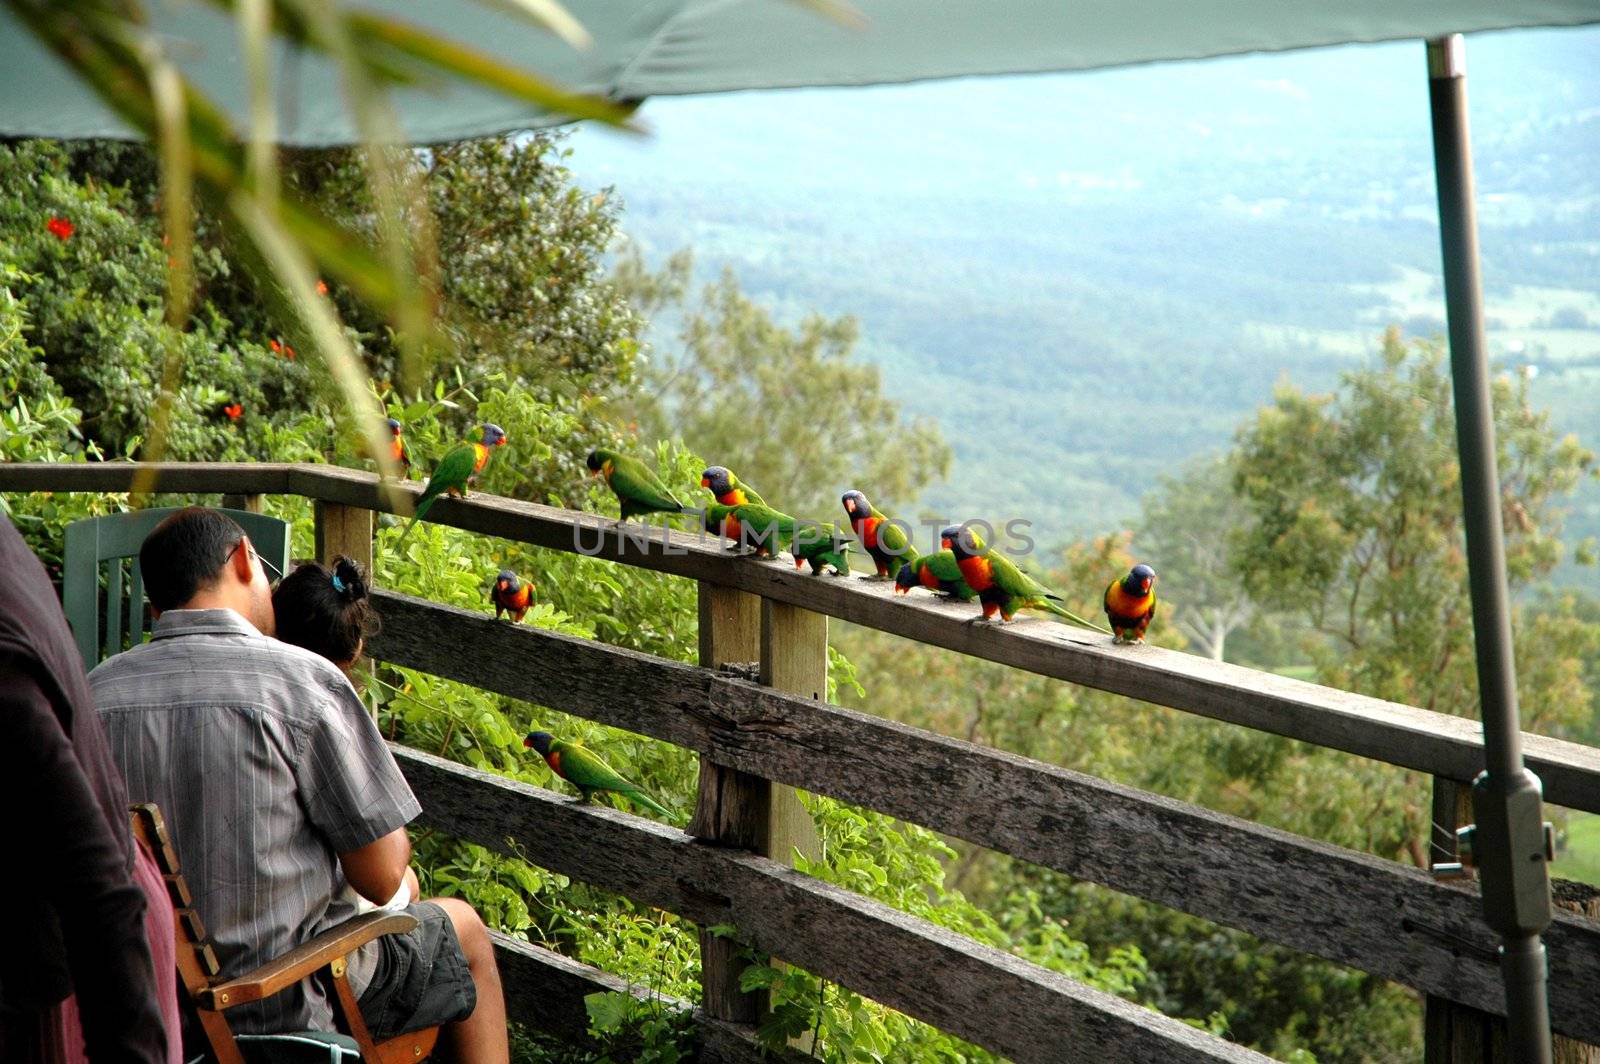 Parrots sitting on the fence at Mt Tamborine in Queensland.